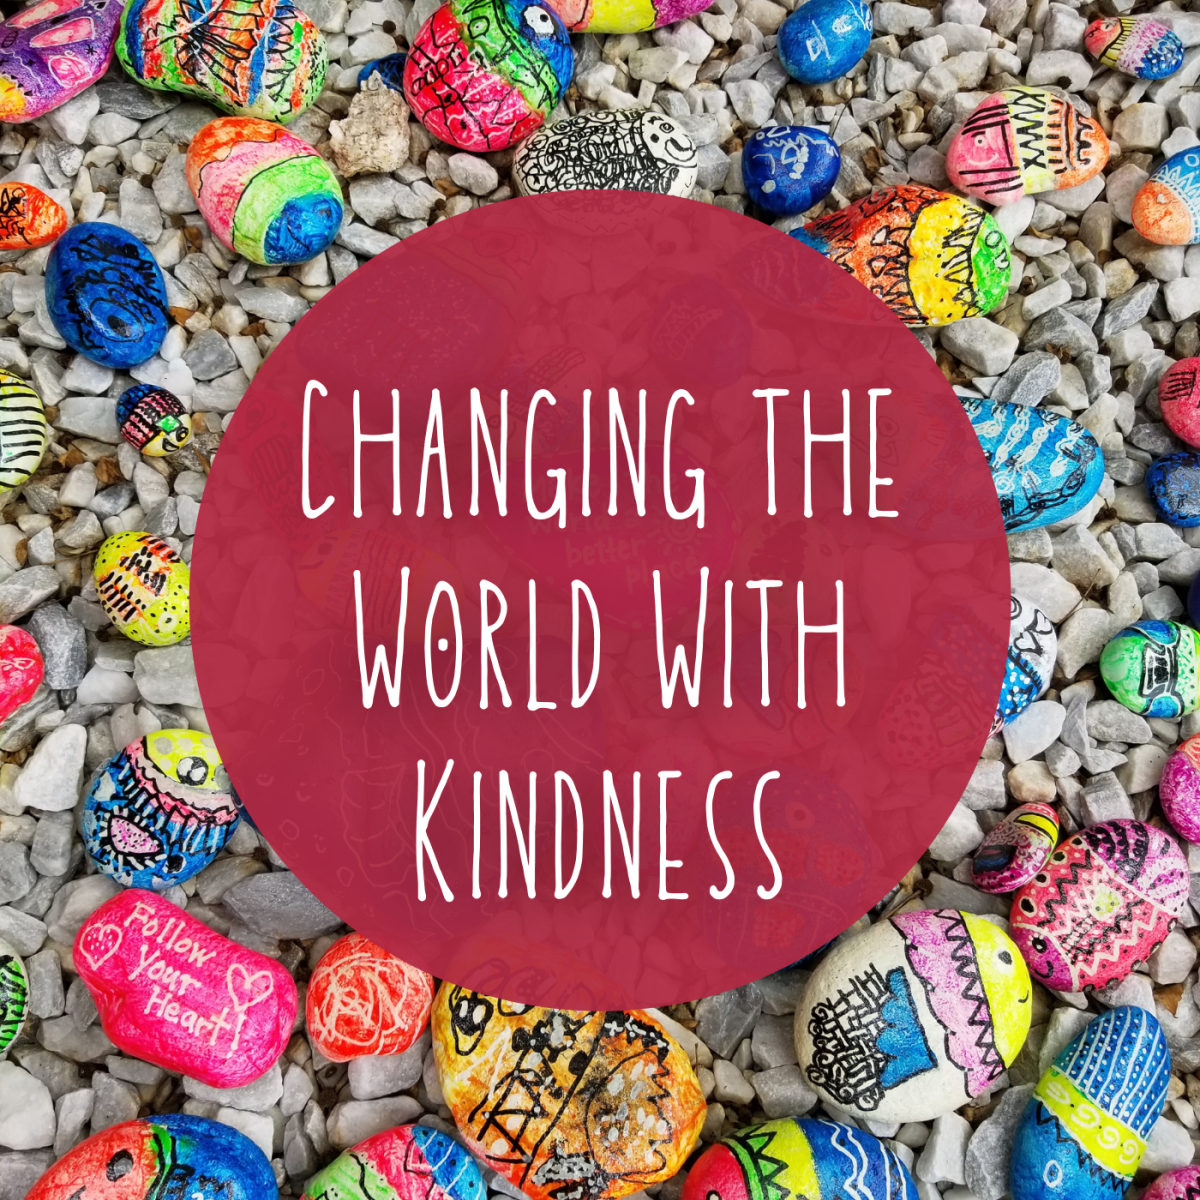 Even a small act of kindness can make a major impact!